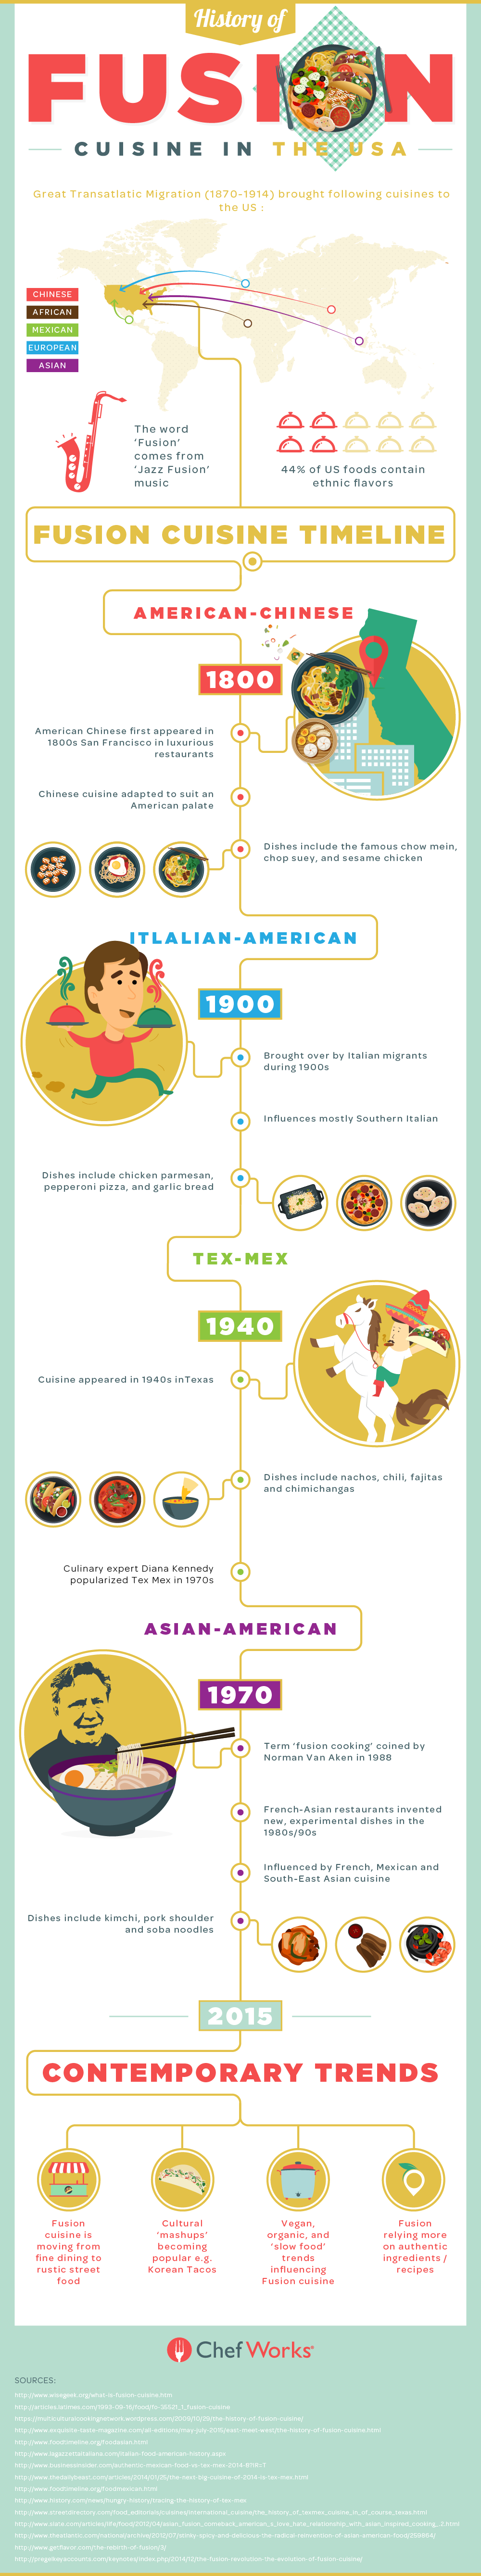 History-of-Fusion-Food-in-US_1.0